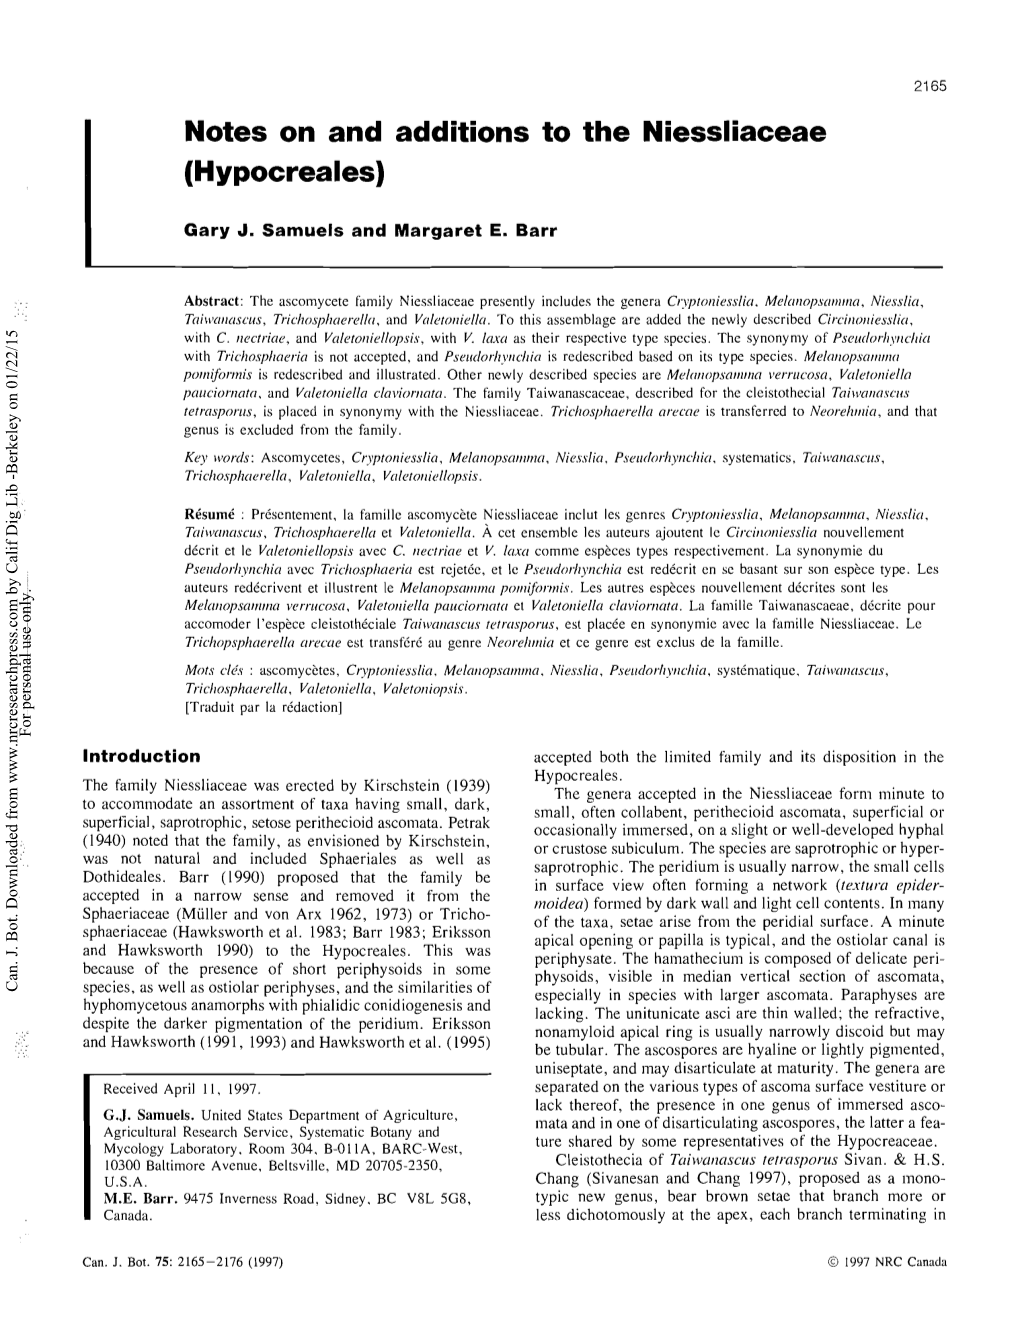 Notes on and Additions to the Niessliaceae (Hypocreales)